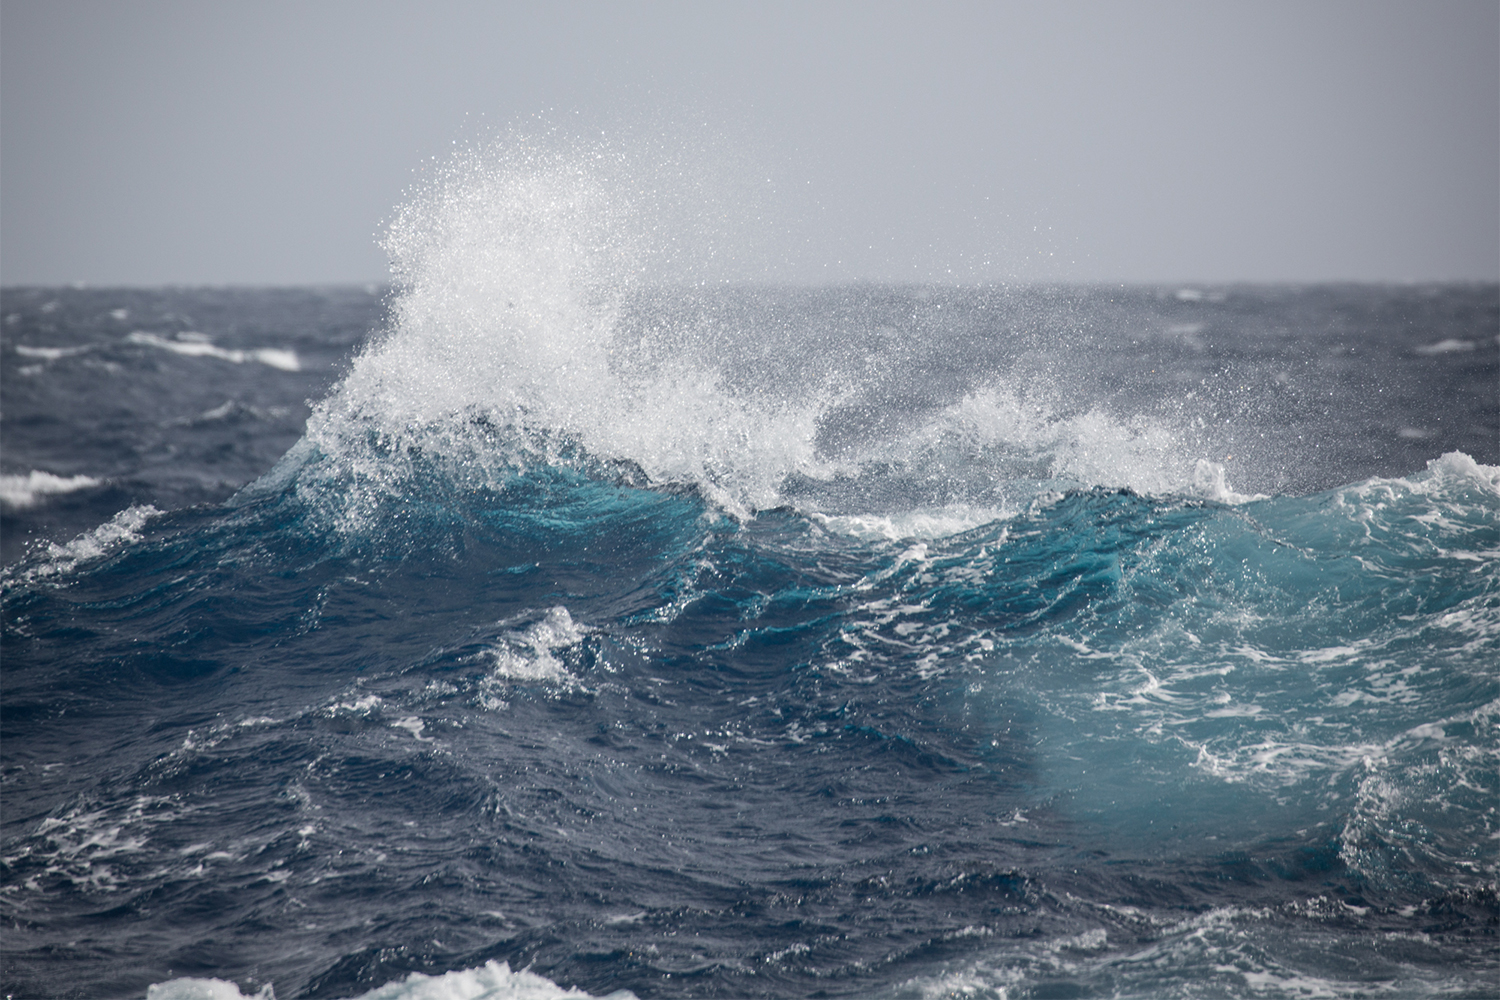 Rough waters in the Drake Passage. Photo: Acacia Johnson